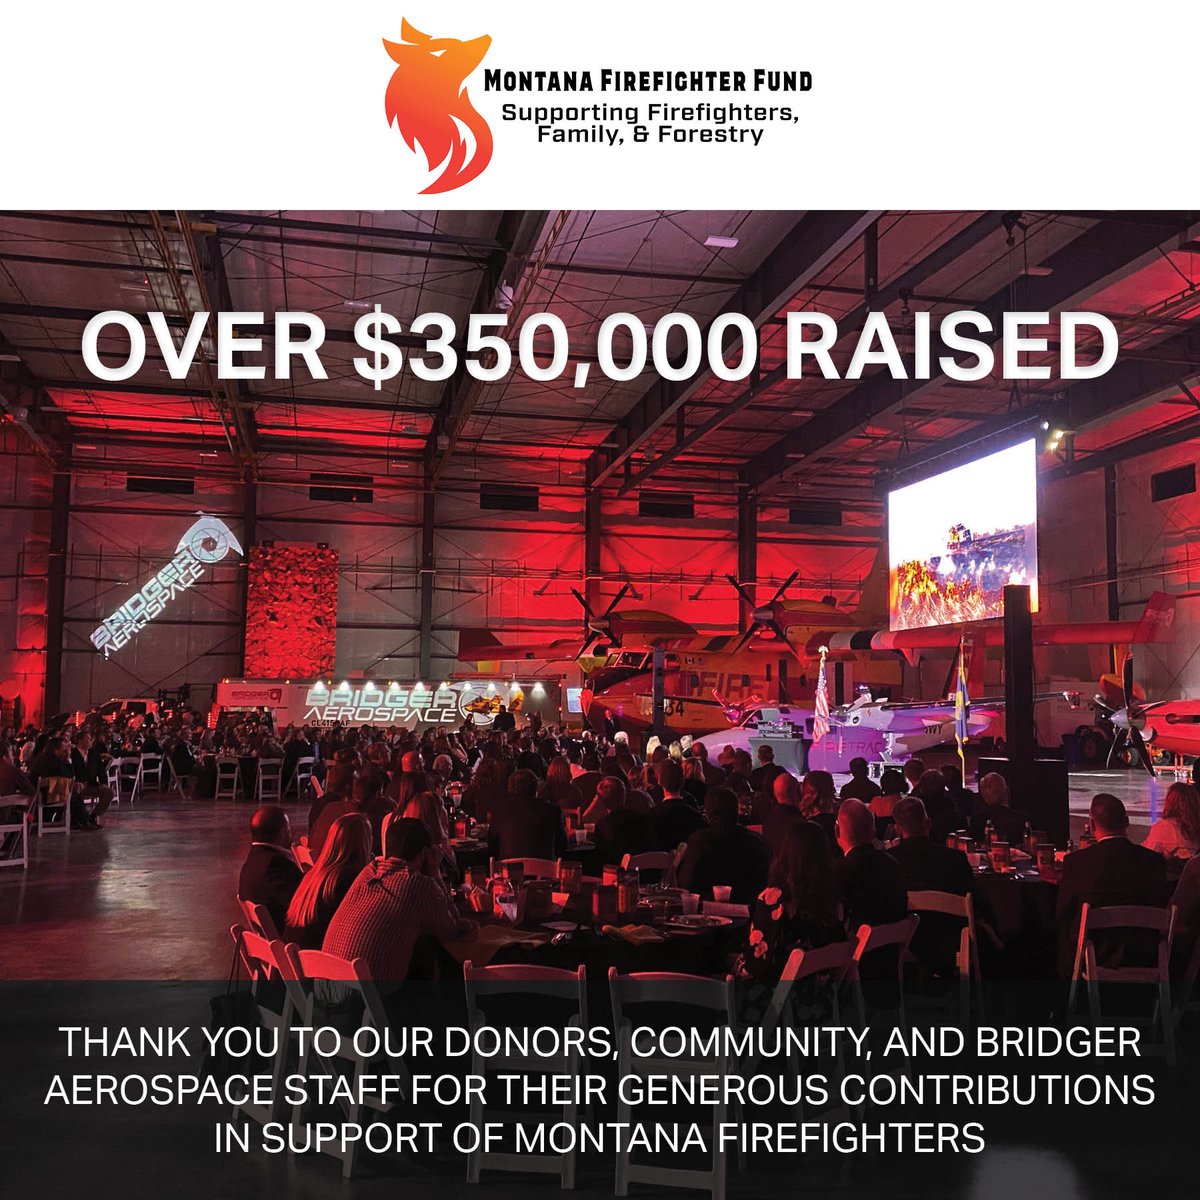 Over $350,000 was raised by our generous donors, community, and Bridger Aerospace staff in support of Montana firefighters! Thank you all who contributed and made this event an incredible success! 

#firefighters #montana #support #montanafirefighterfund #bridgeraerospace